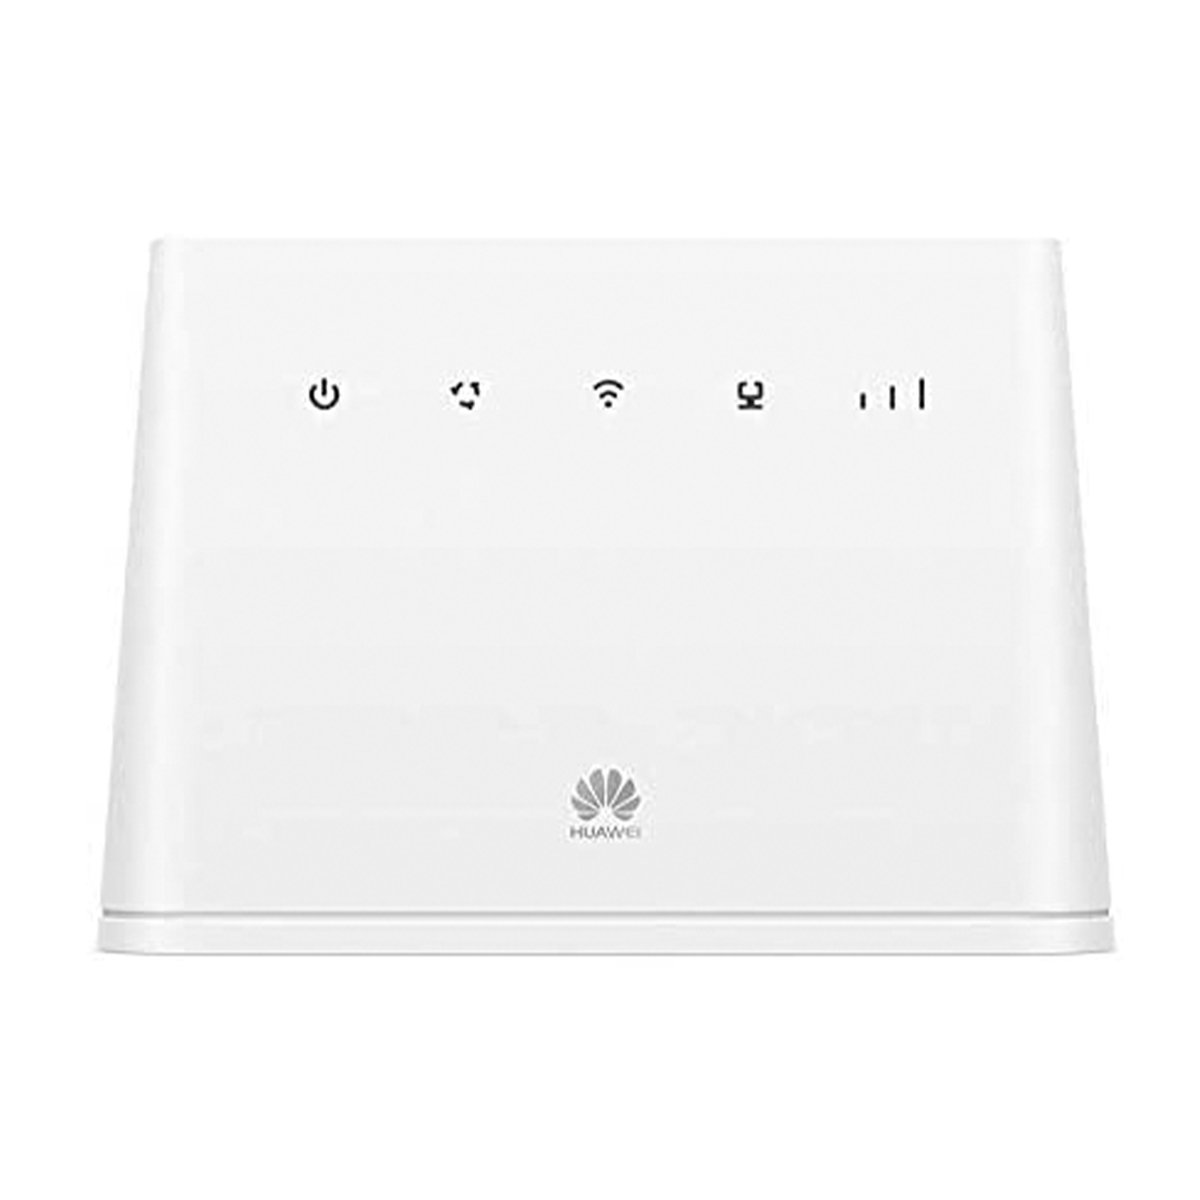 Huawei B311-221 150 Mbps 4G LTE Wireless Router White